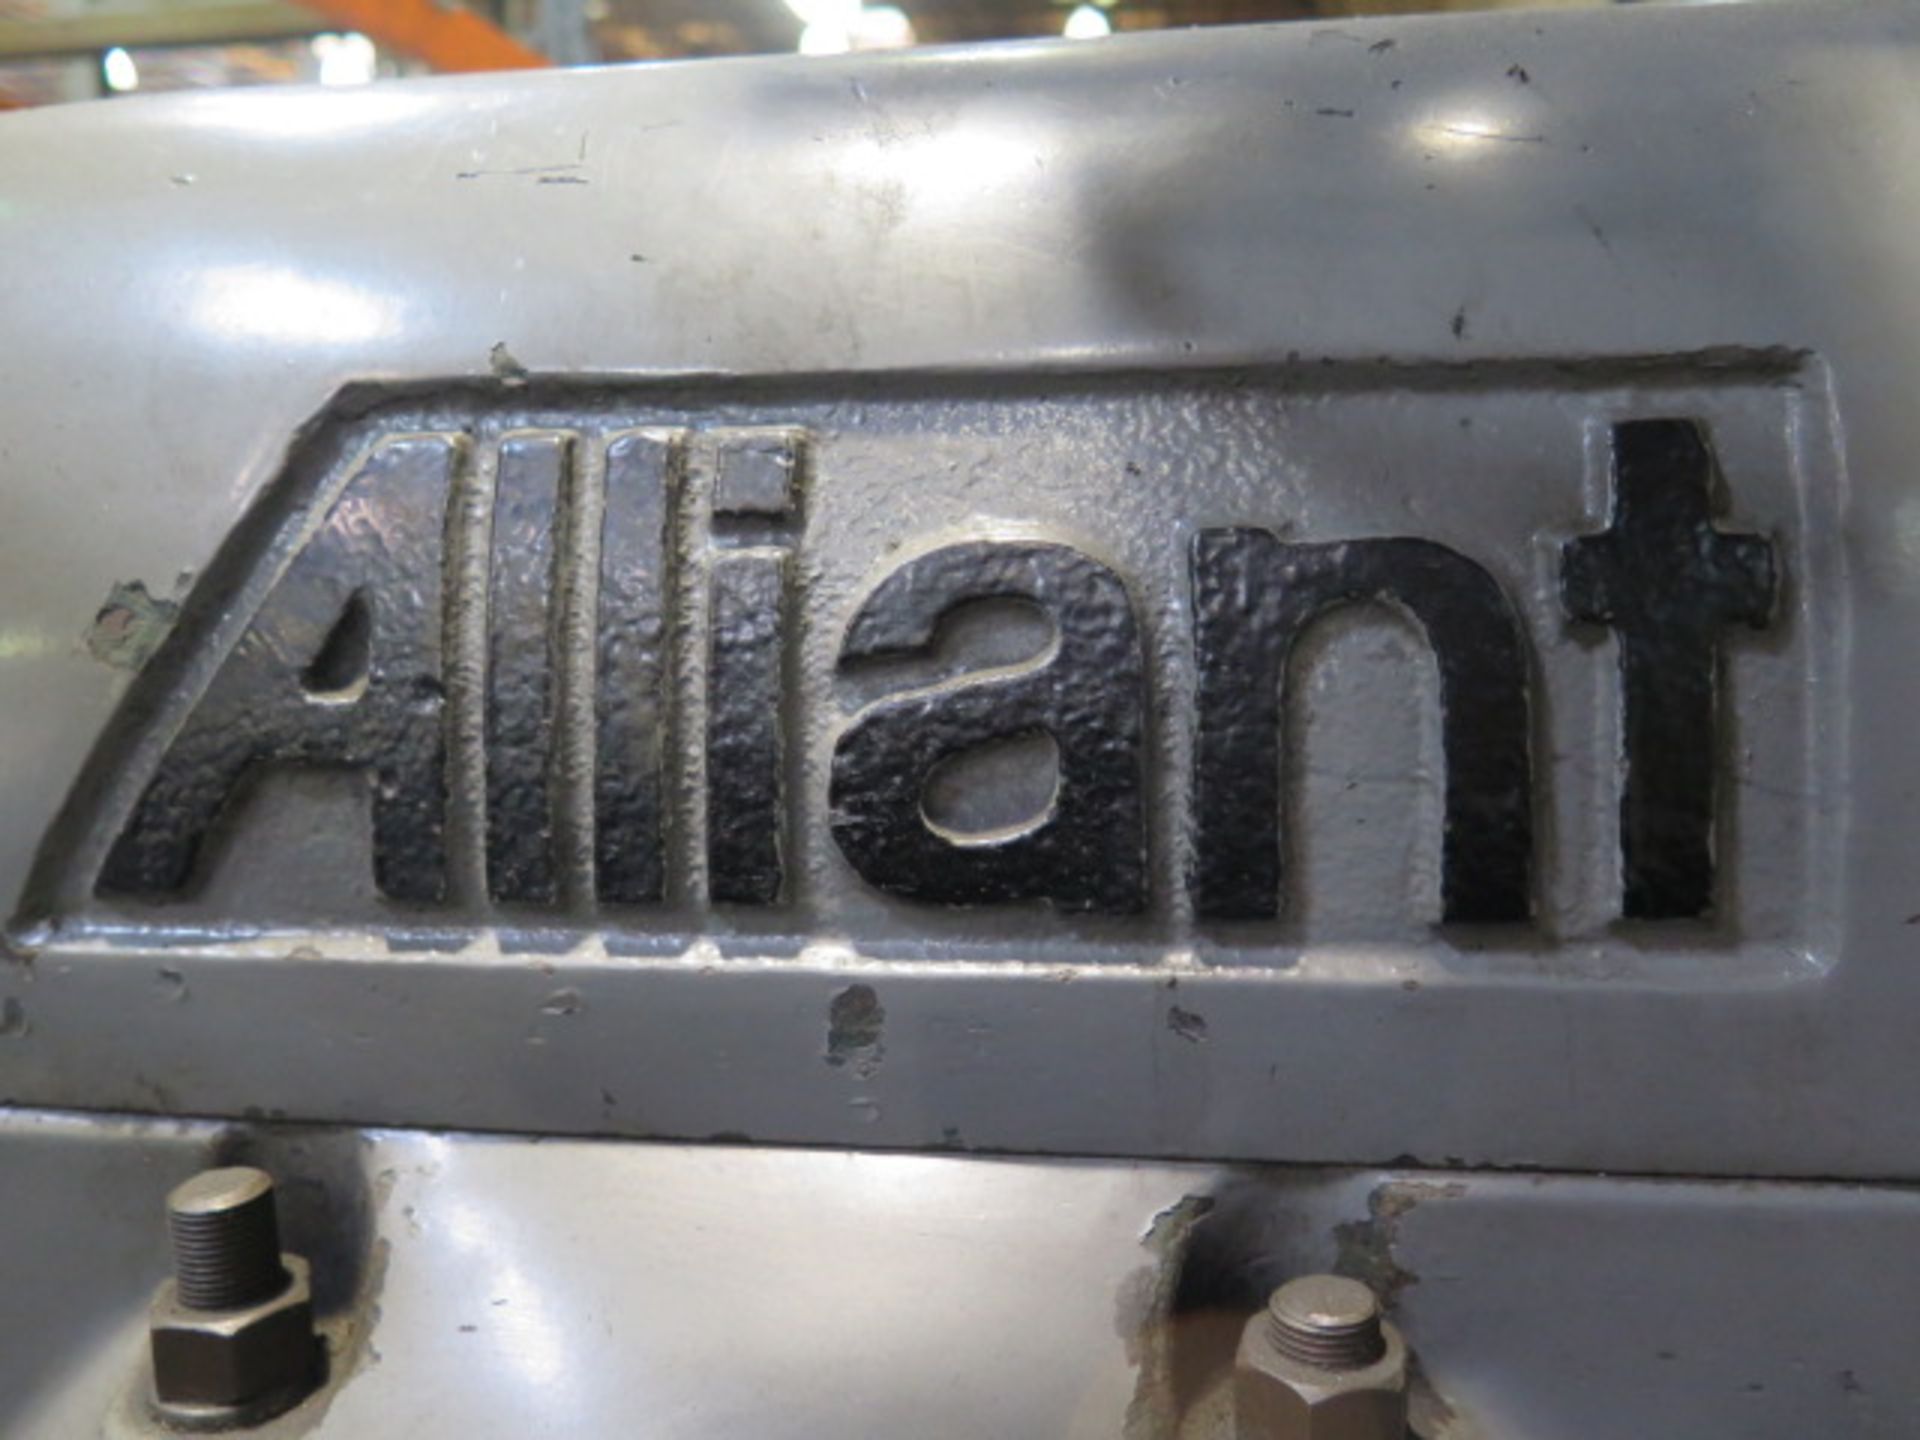 Alliant Vertical Mill s/n 61210241 w/ DRO, 2Hp Motor,60-4500 Dial Change RPM, Chrome ways,SOLD AS IS - Image 4 of 16